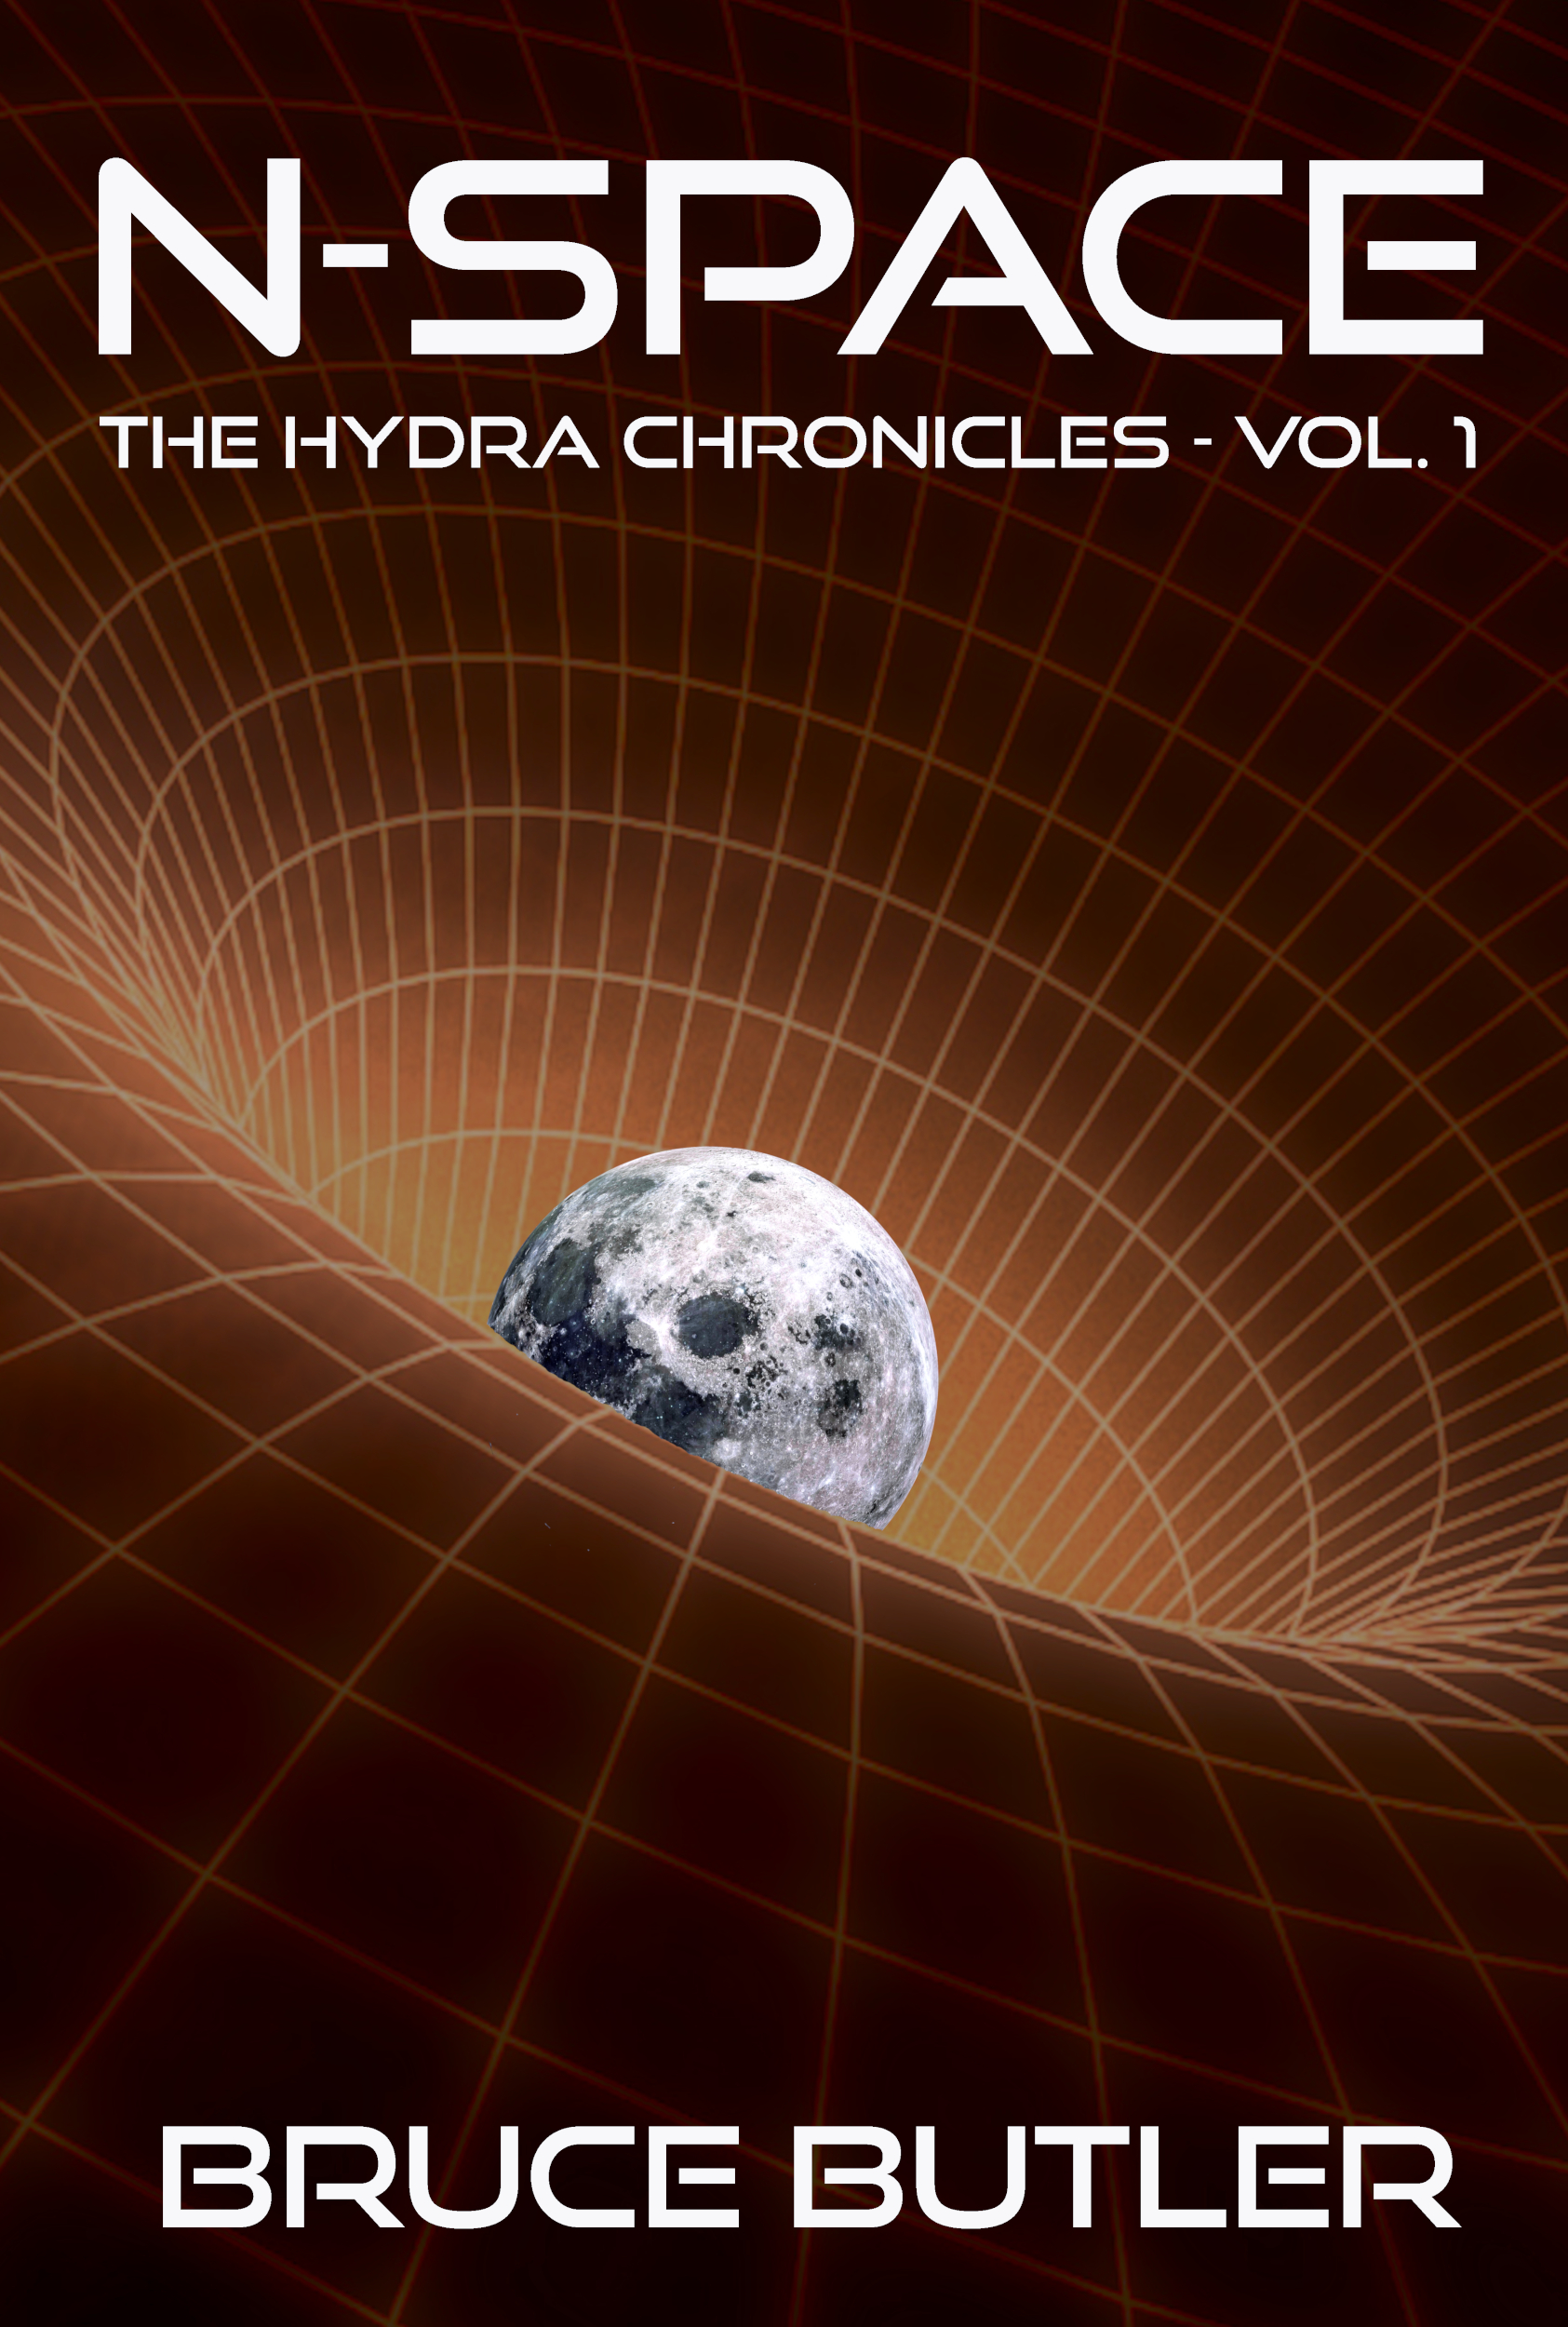 Book cover of "N-SPACE: THE HYDRA CHRONICLES-VOL. 1"